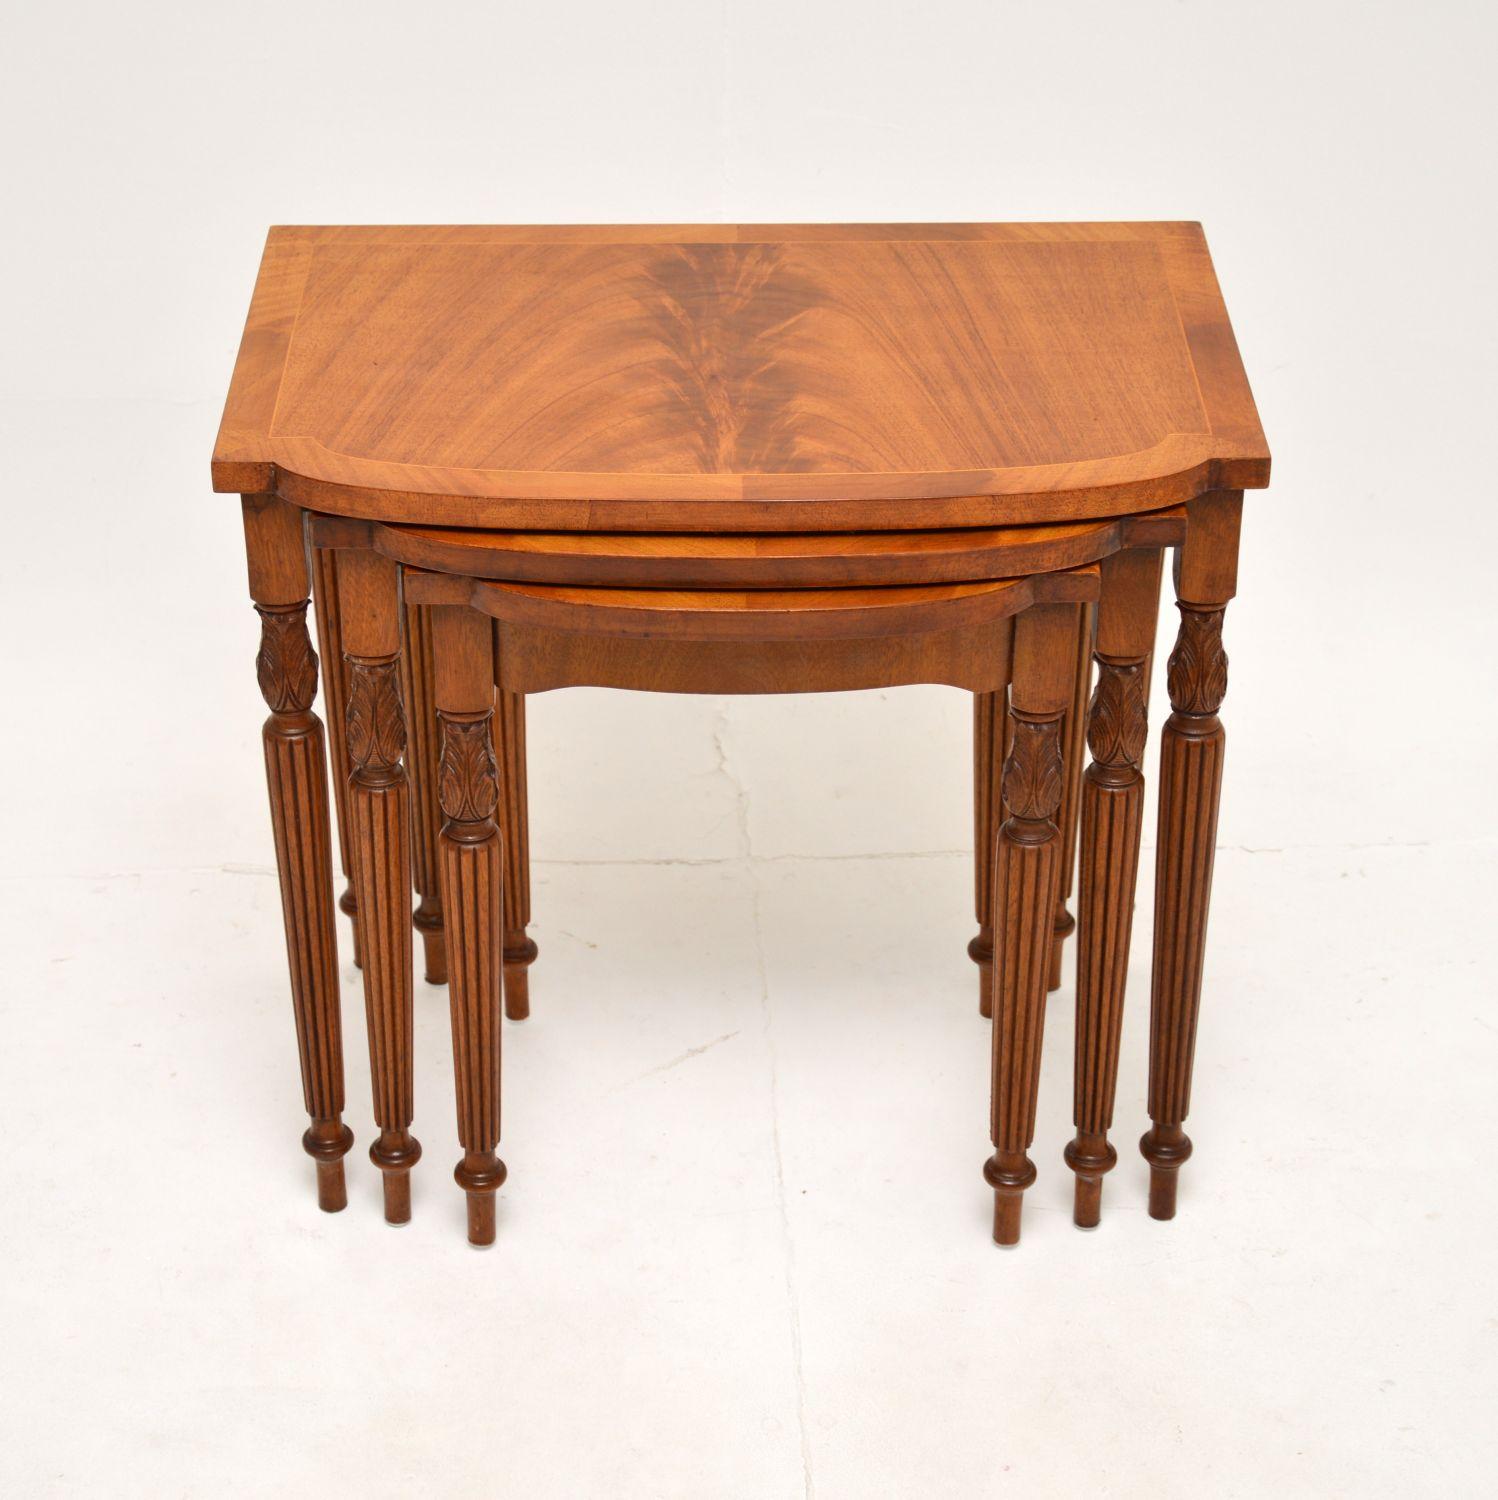 A beautifully made antique inlaid nest of three tables. They were made in England, they date from around the 1950’s.

The quality is superb, they have gorgeous tops with cross banded edges, and sit on finely fluted legs with crisply carved acanthus